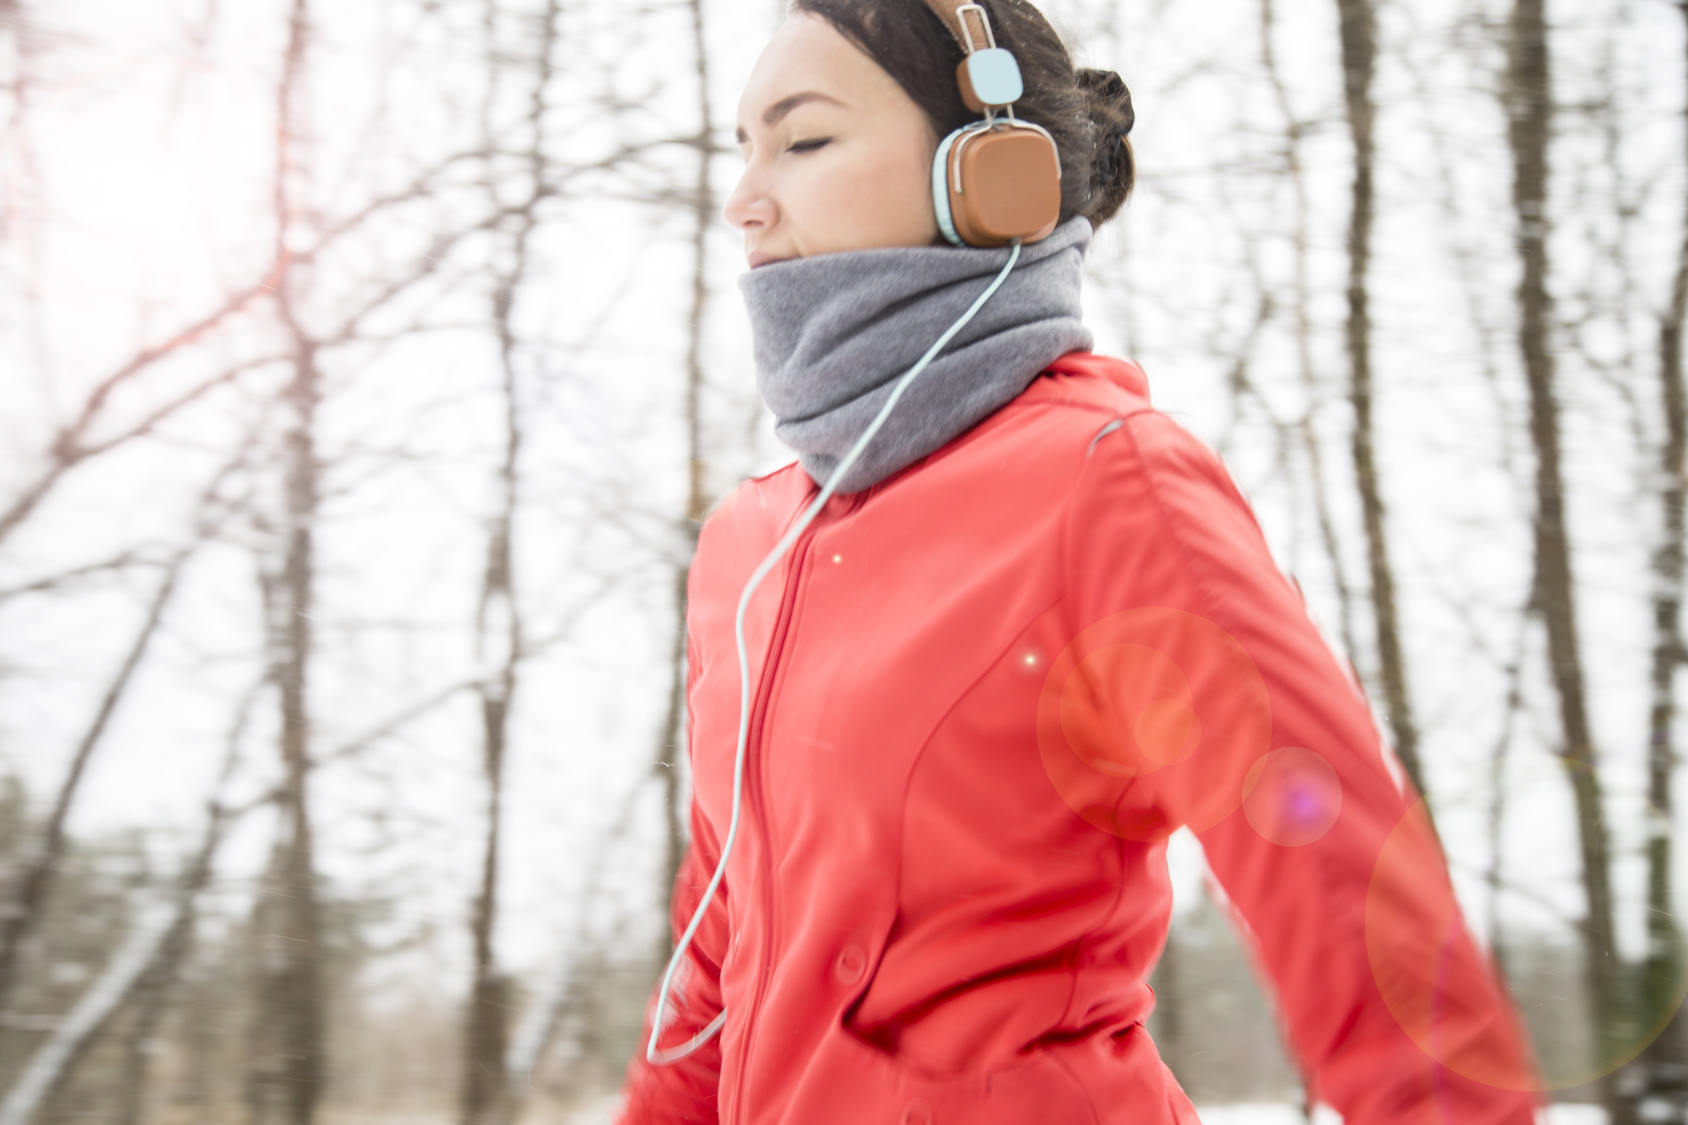 How to Breathe When Running in the Cold